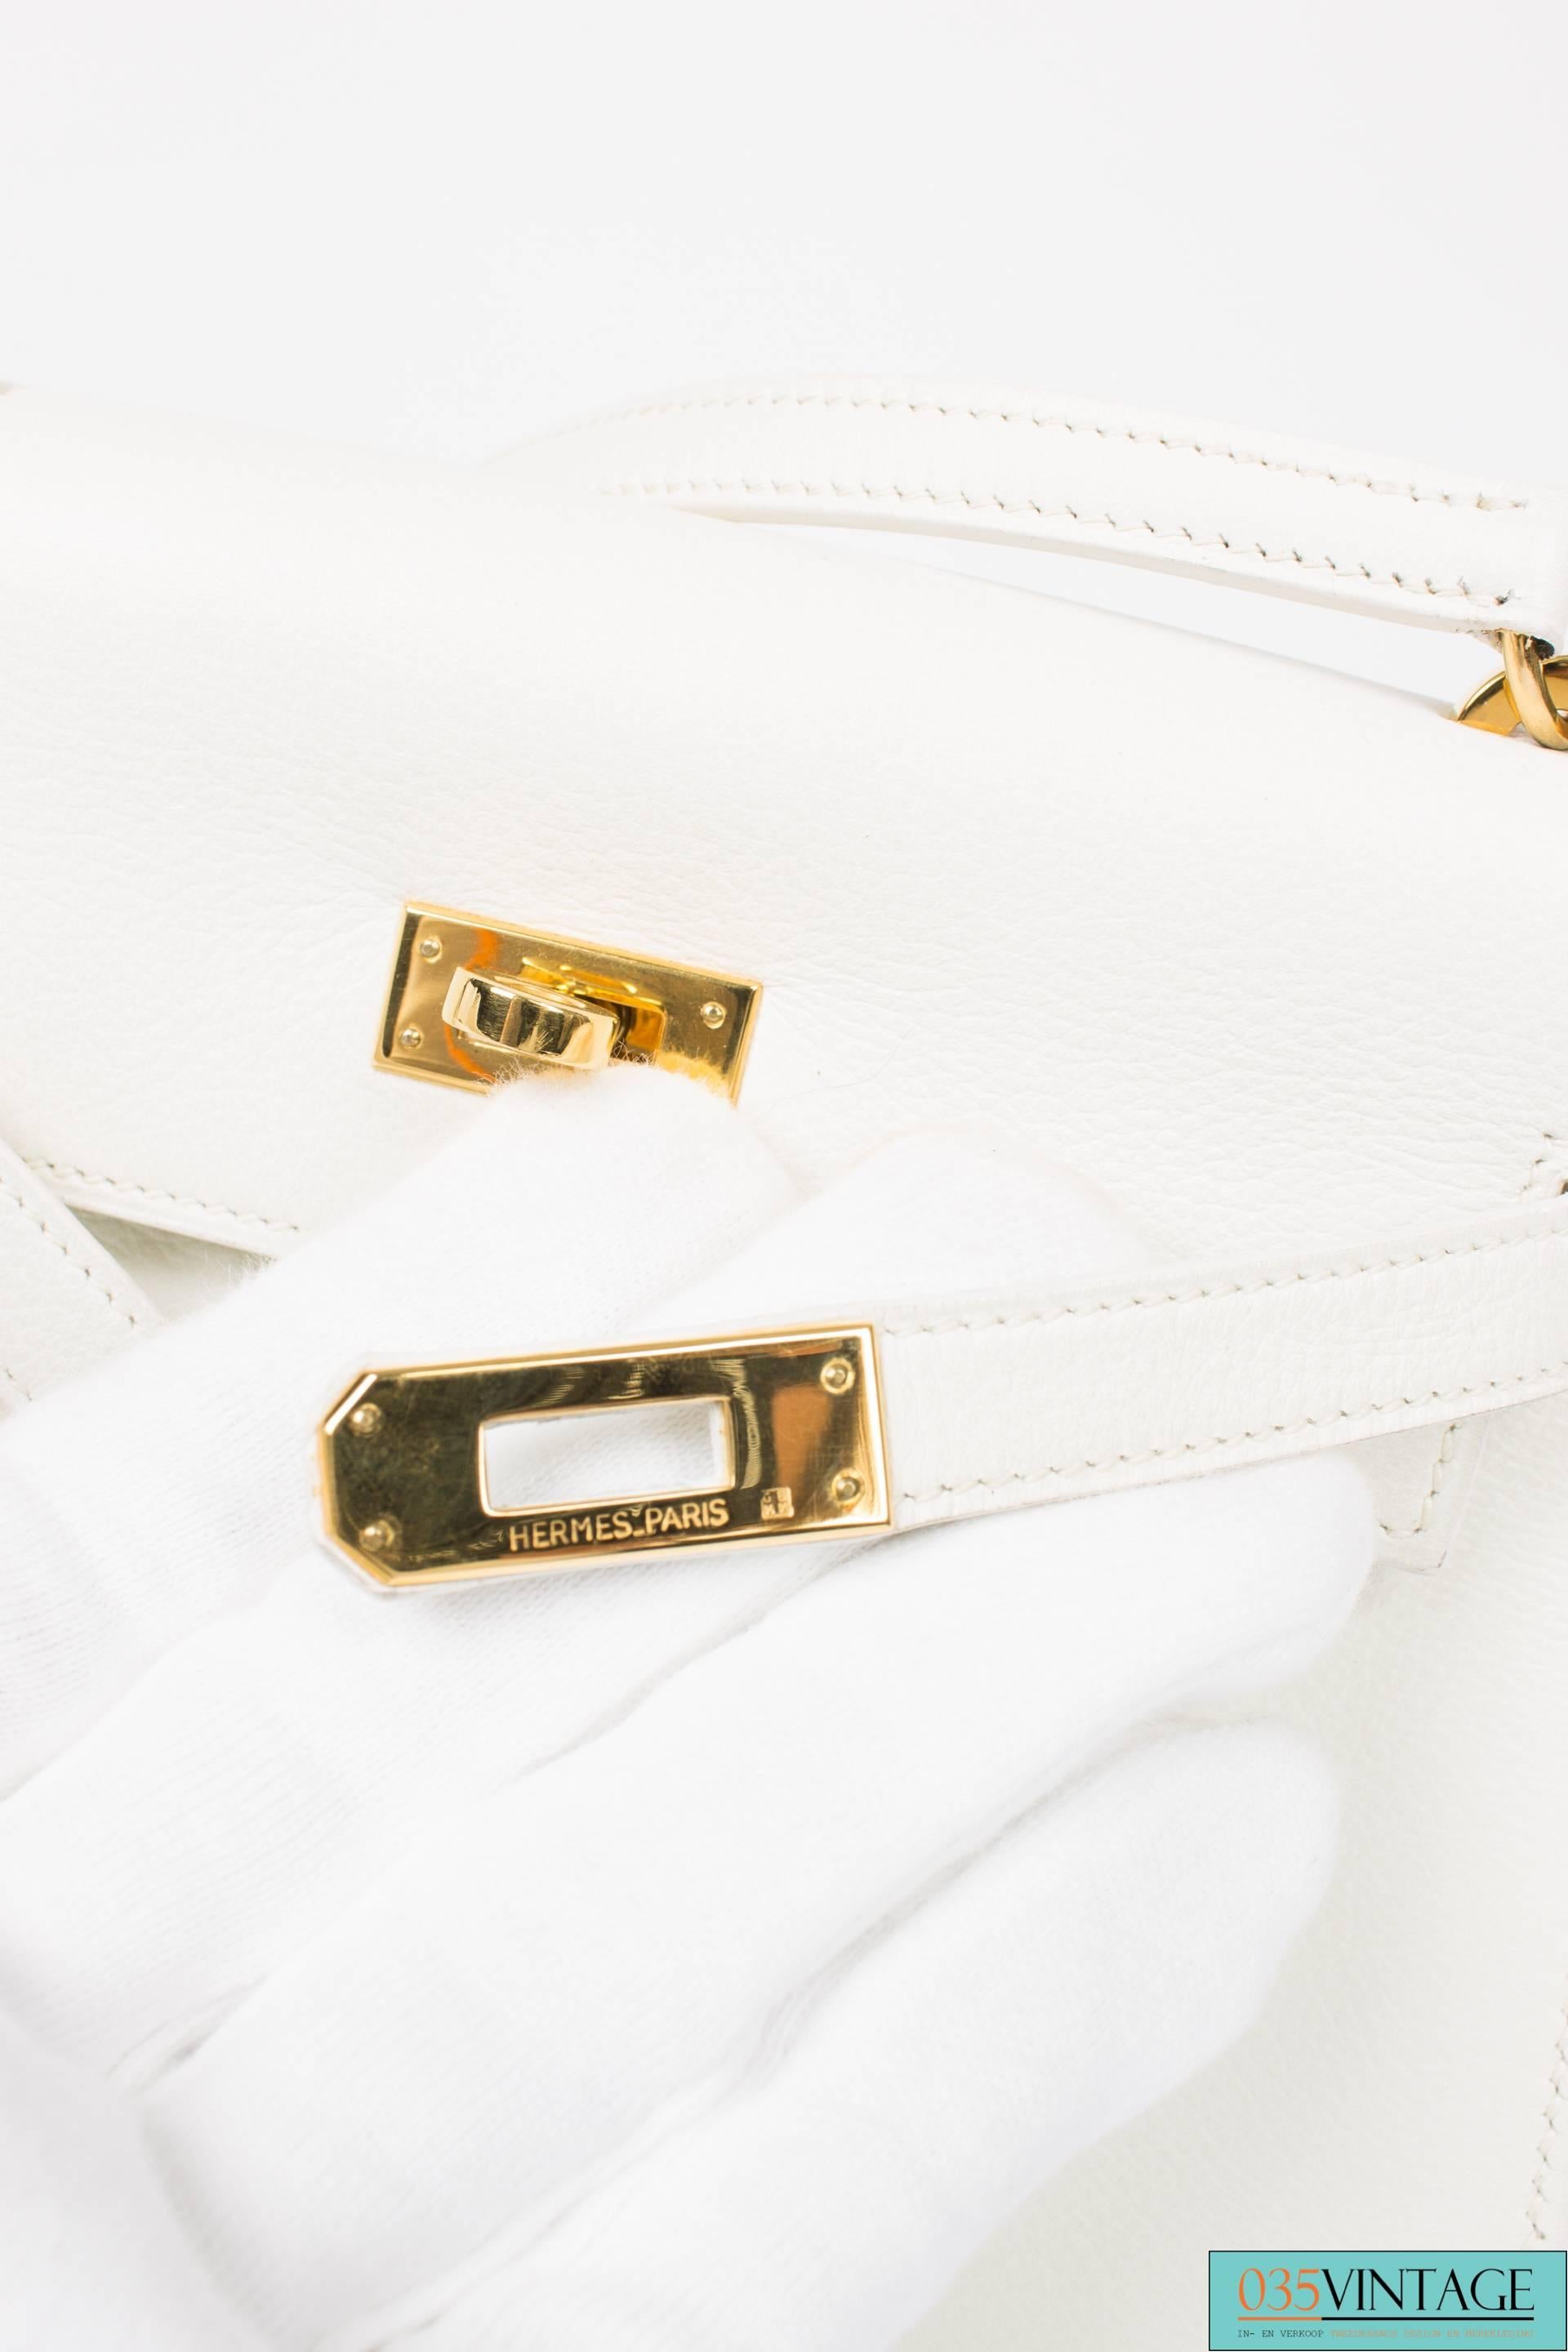 
We did not have this one before; the Hermès Mini Kelly Bag 20. A real baby Kelly!

The hardware is gold plated and the sturdy leather white. A traditional Kelly turnlock closure, only this time without the lock. The exterior is clean and